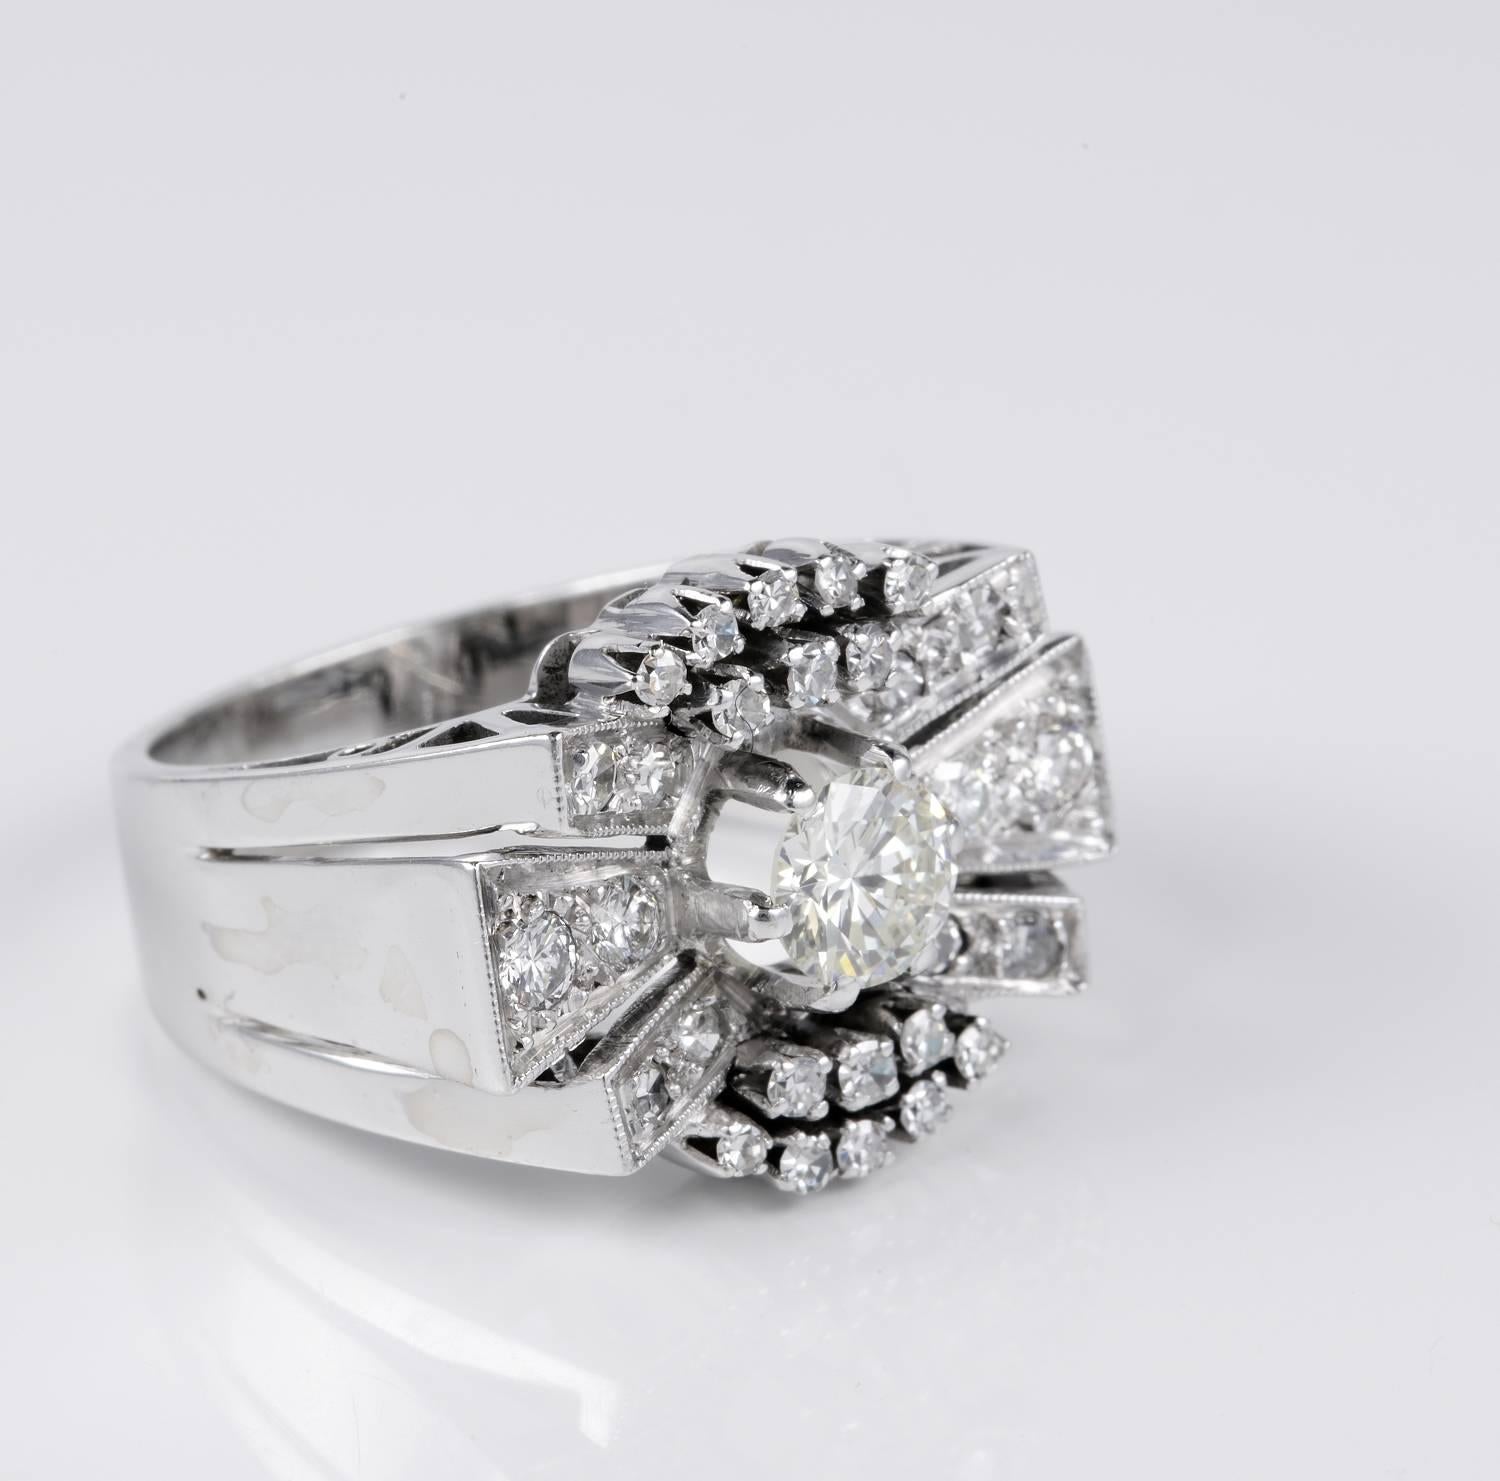 An impressive Art Deco cocktail ring in marvellous bow design expression of glam during the Deco period
Crown boasts a centre old Transitional brilliant cut Diamond of .55 CT rated as G VS –
from this develops the charming Diamond bow with sides